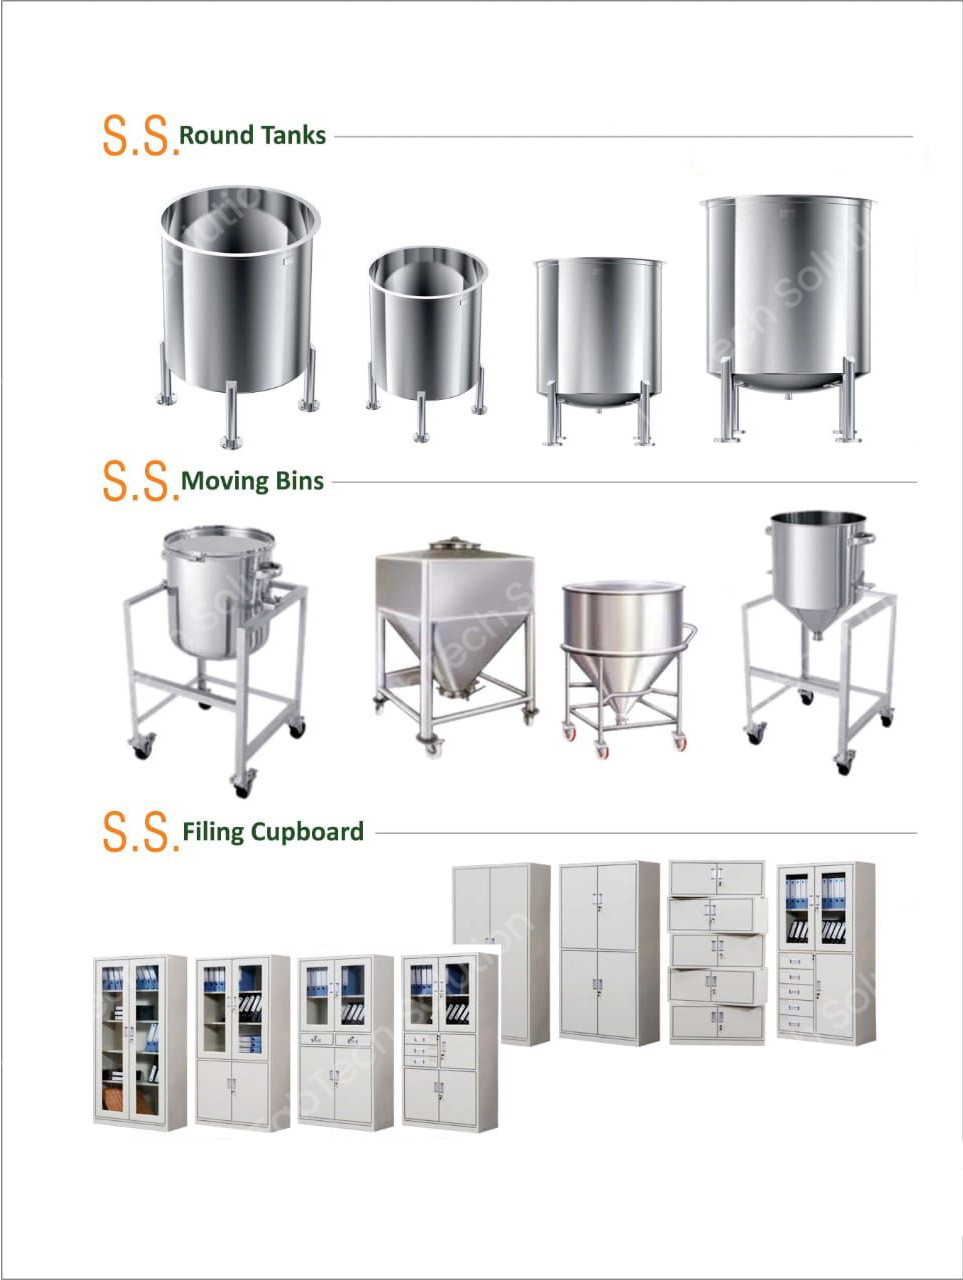 Clean Room Furniture, SS Tank Bins & Cupboard CRF, Supplier and Manufacturer in Ahmedabad, Gujarat, India